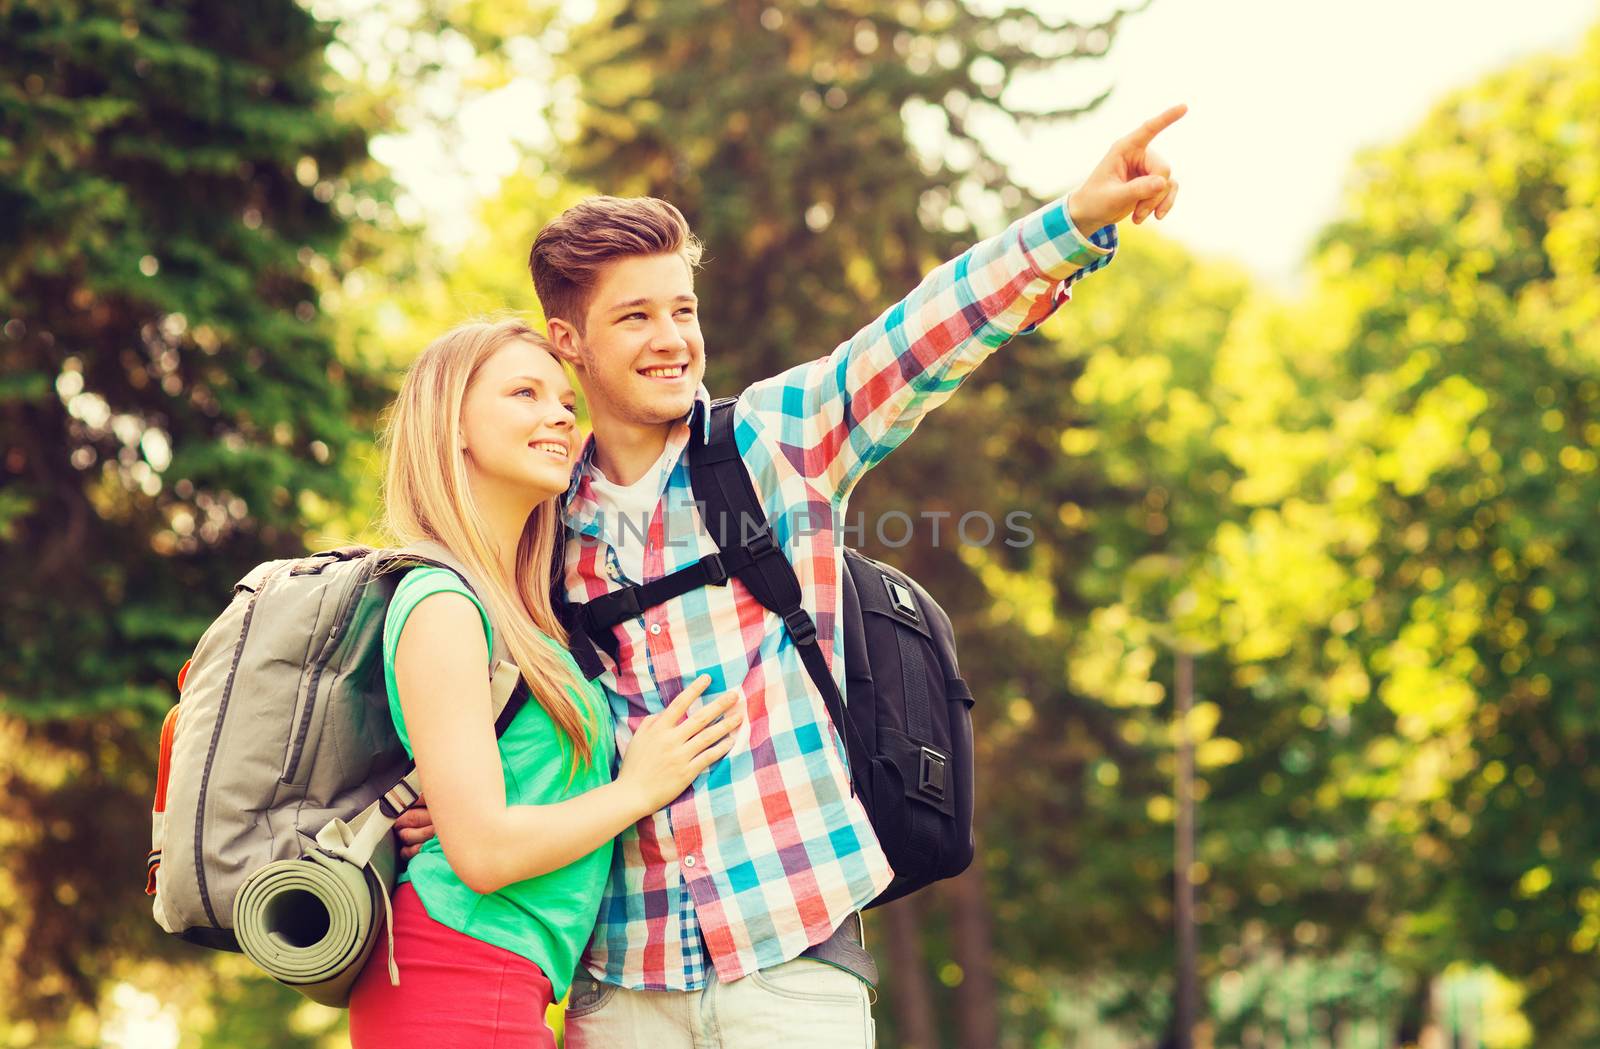 travel, vacation, tourism and friendship concept - smiling couple with backpacks pointing finger in nature